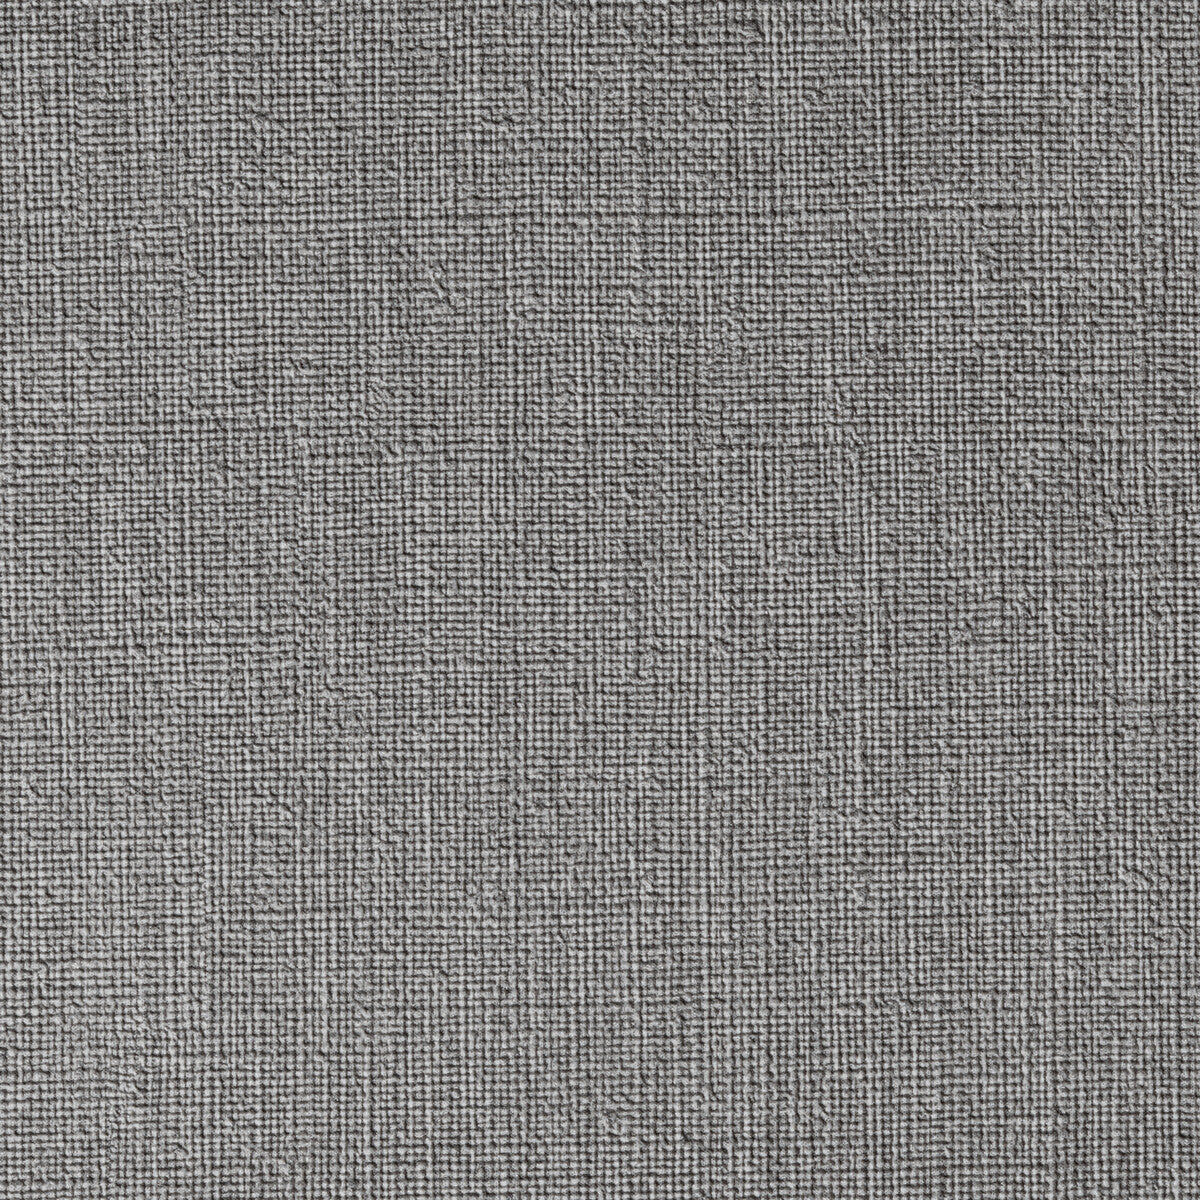 Caslin fabric in mercury color - pattern CASLIN.21.0 - by Kravet Contract in the Foundations / Value collection